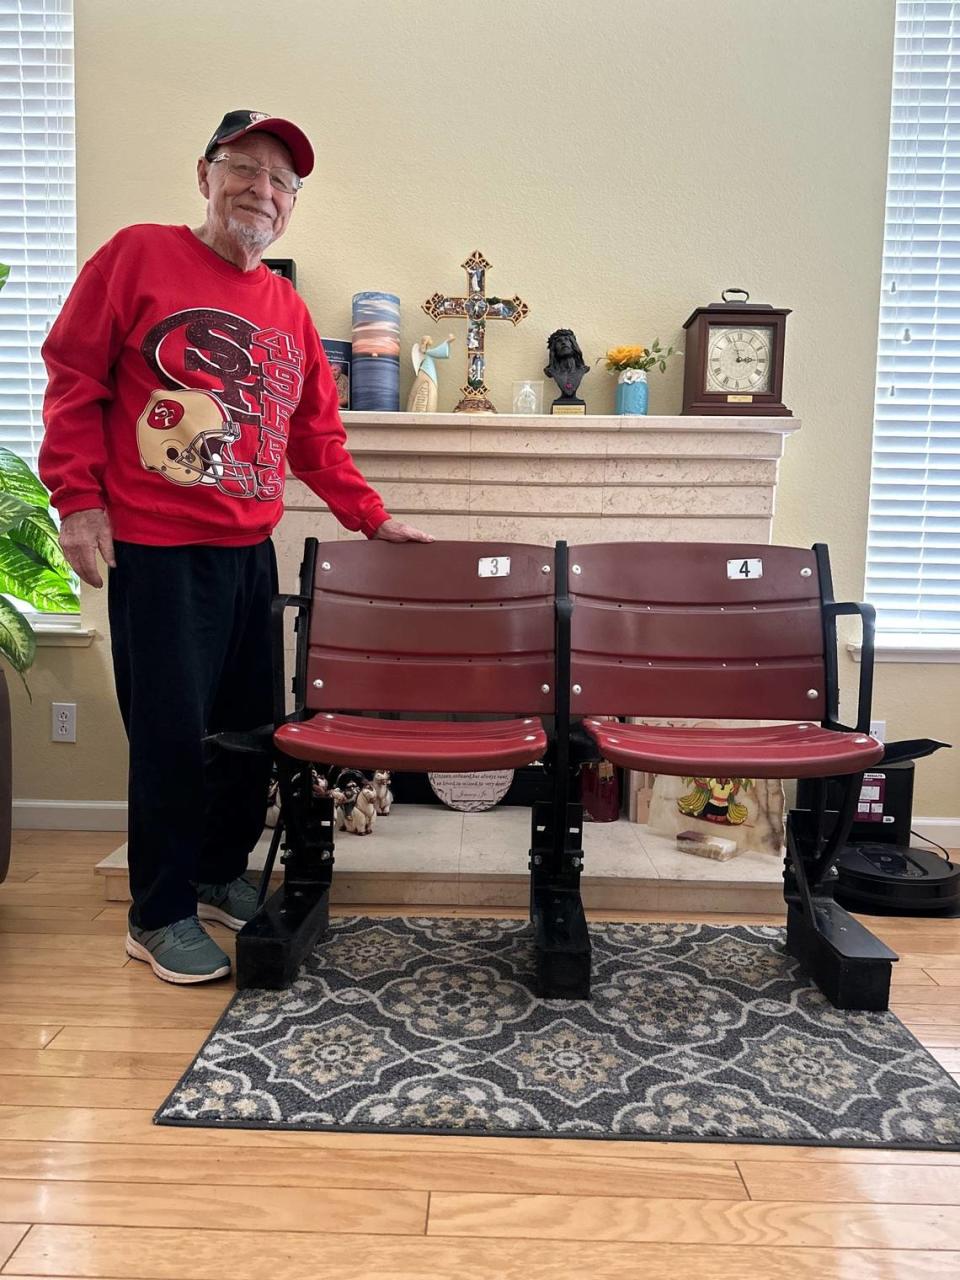 Nearly 90 Niners fan James Valdivia of Modesto stands by the two seats from Candlestick Park he got as souvenirs after the stadium was torn down.